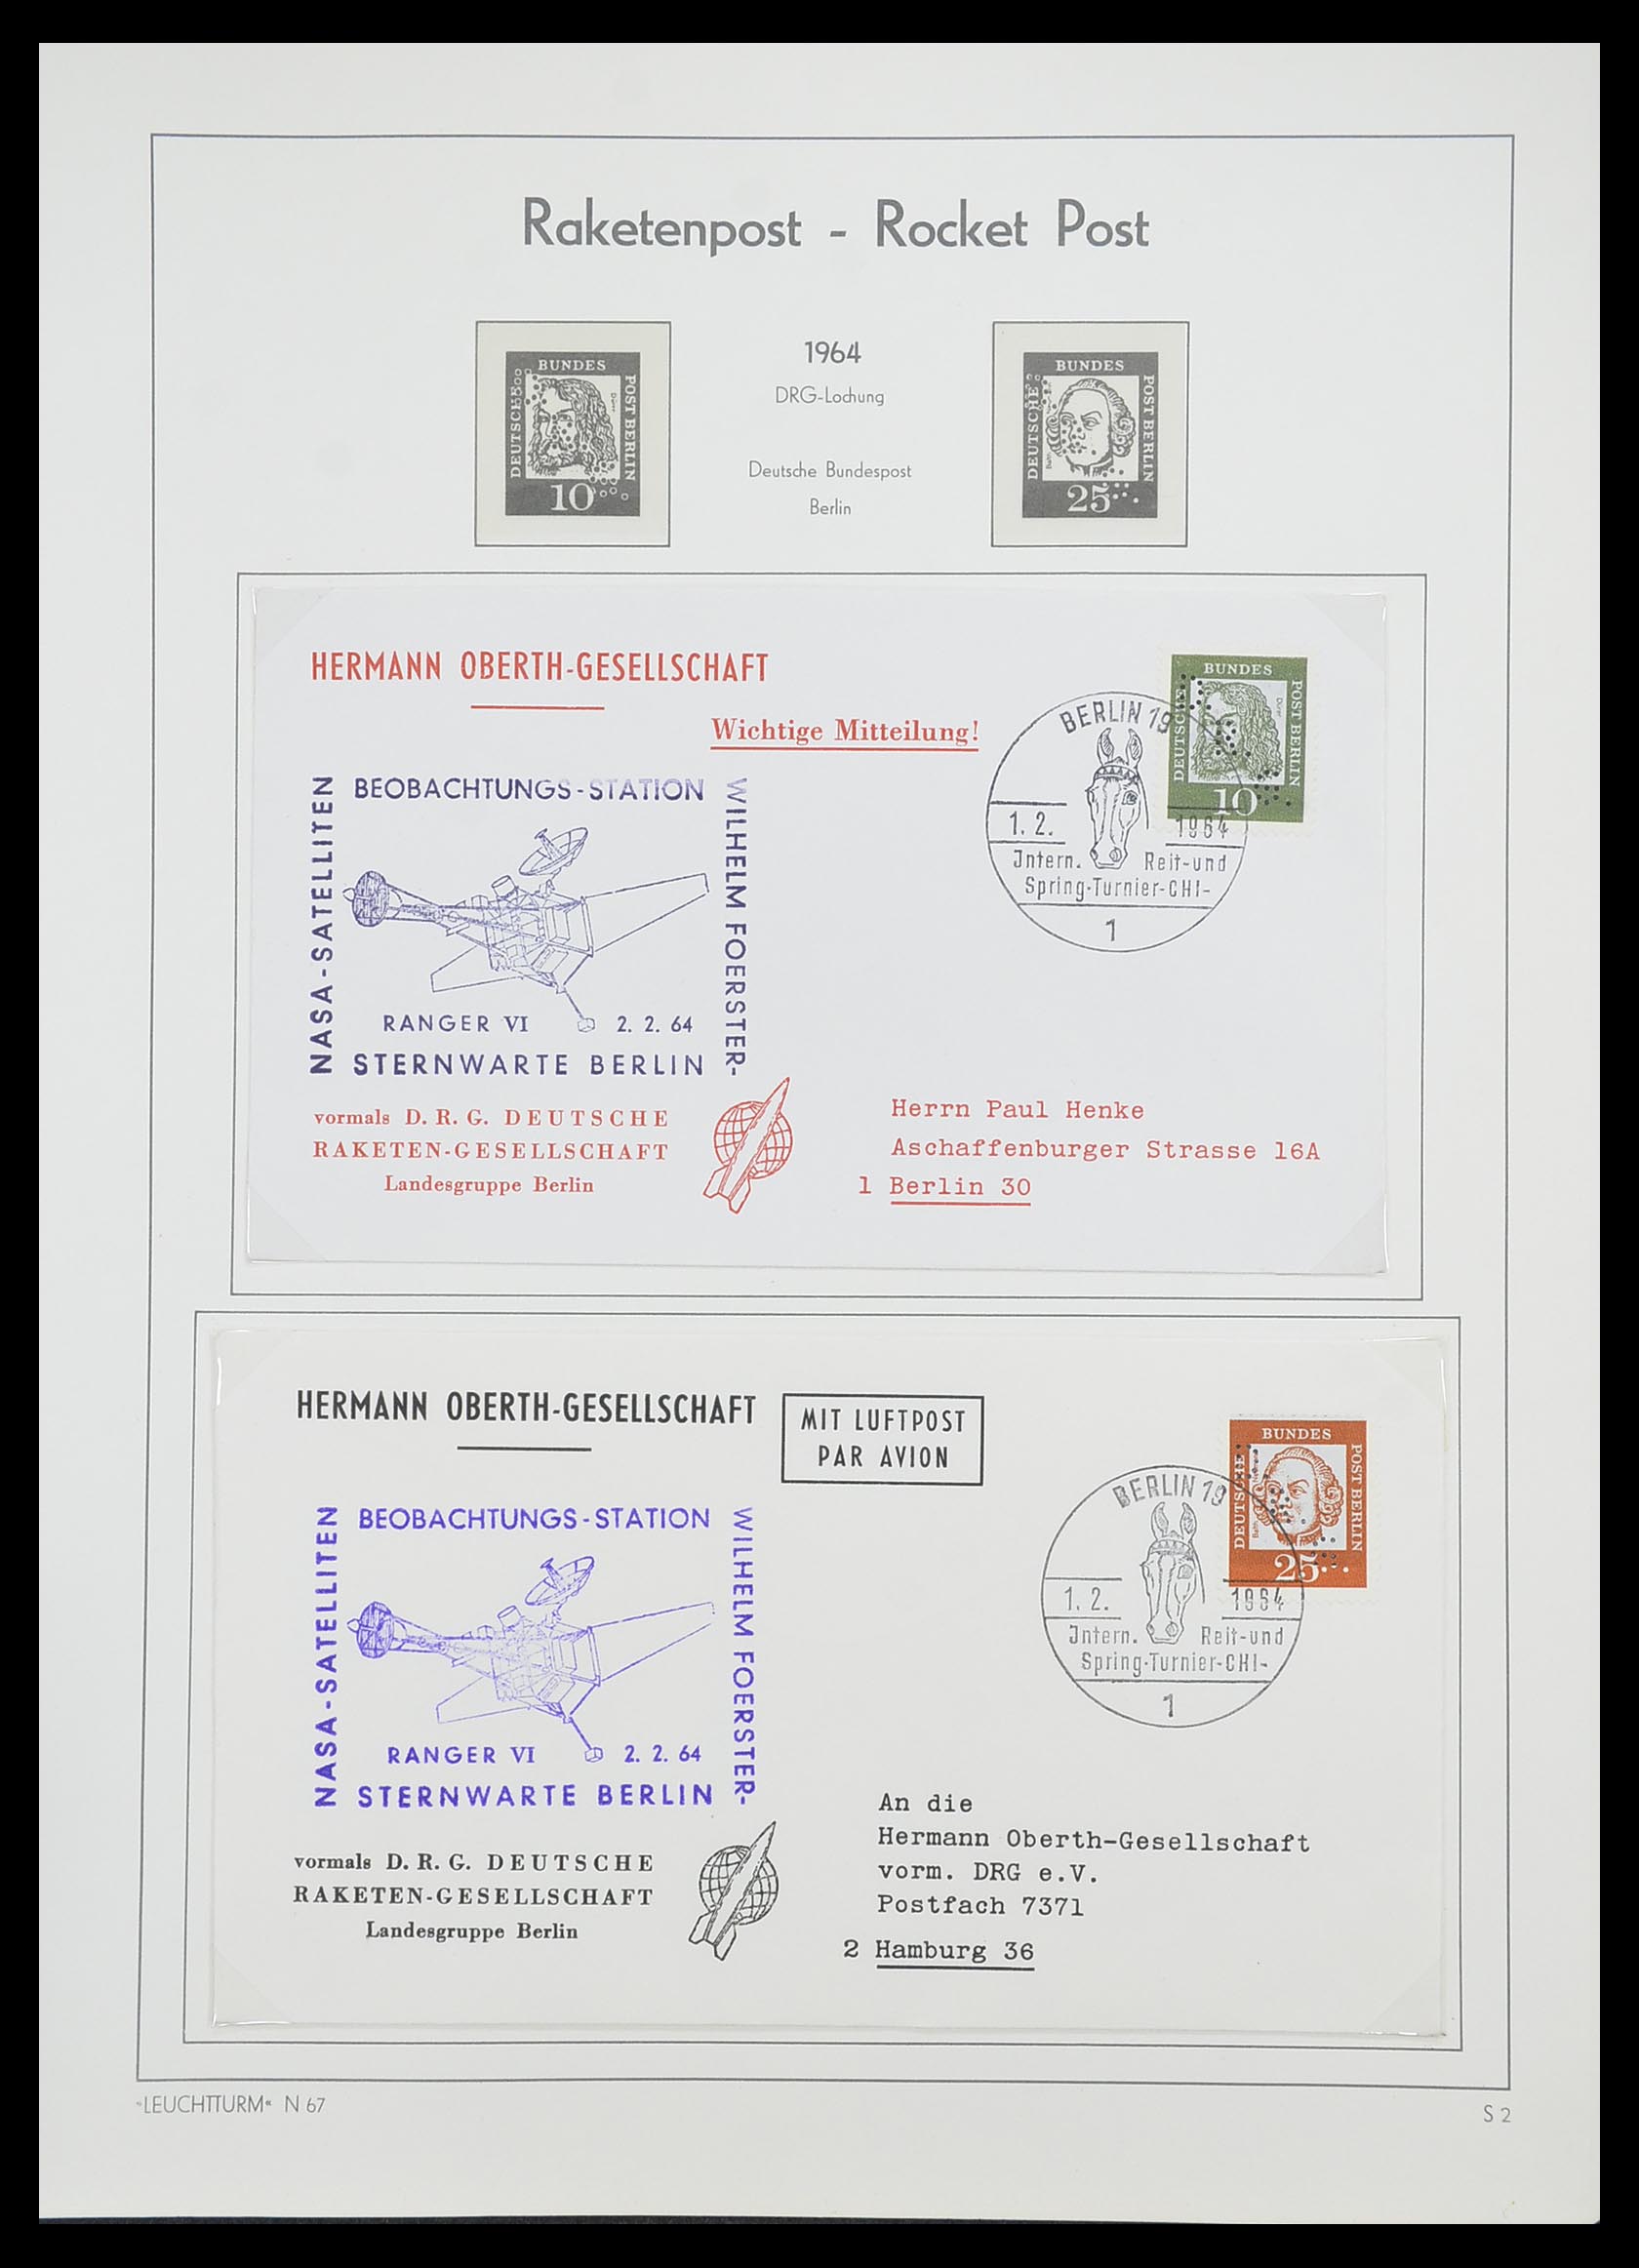 33463 074 - Stamp collection 33463 Rocket mail covers.